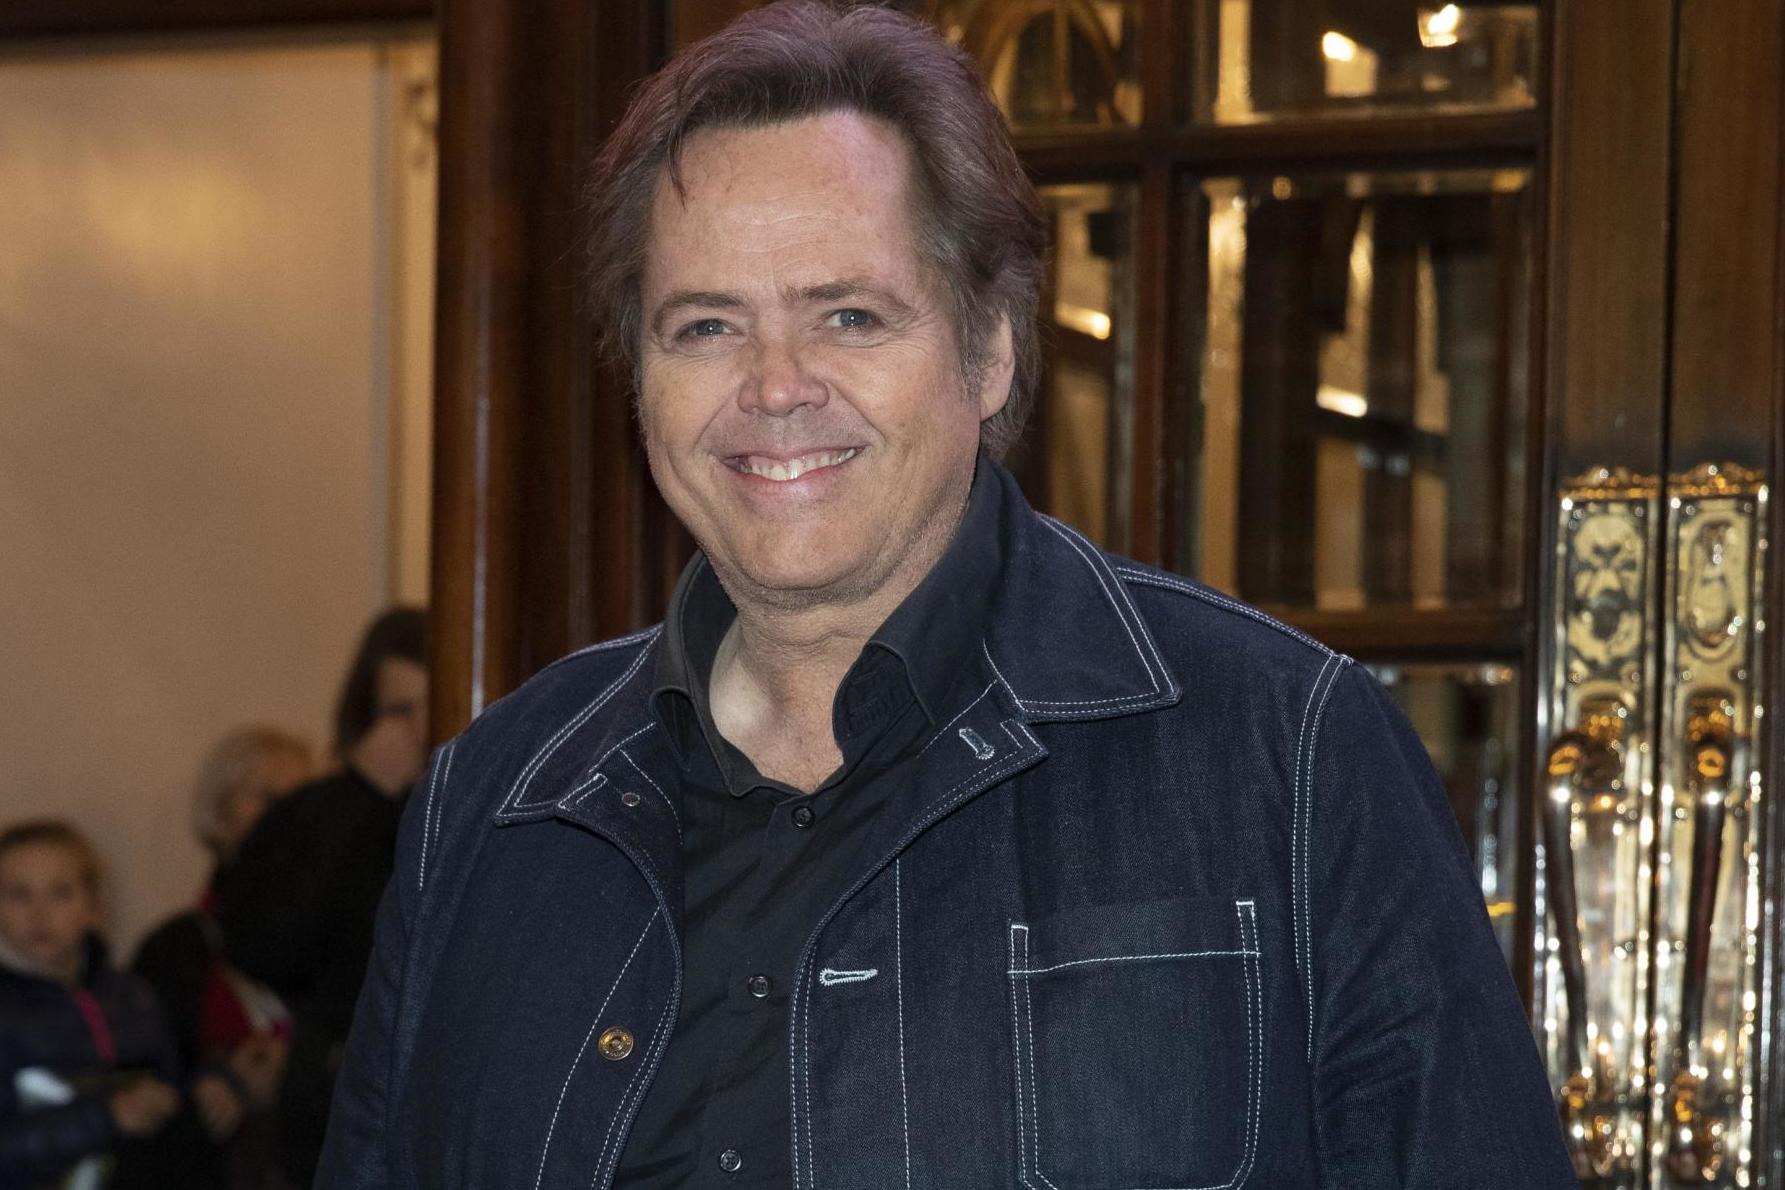 Jimmy Osmond attends the premiere of 'Snow White' at London Palladium on 12 December, 2018 in London, England.